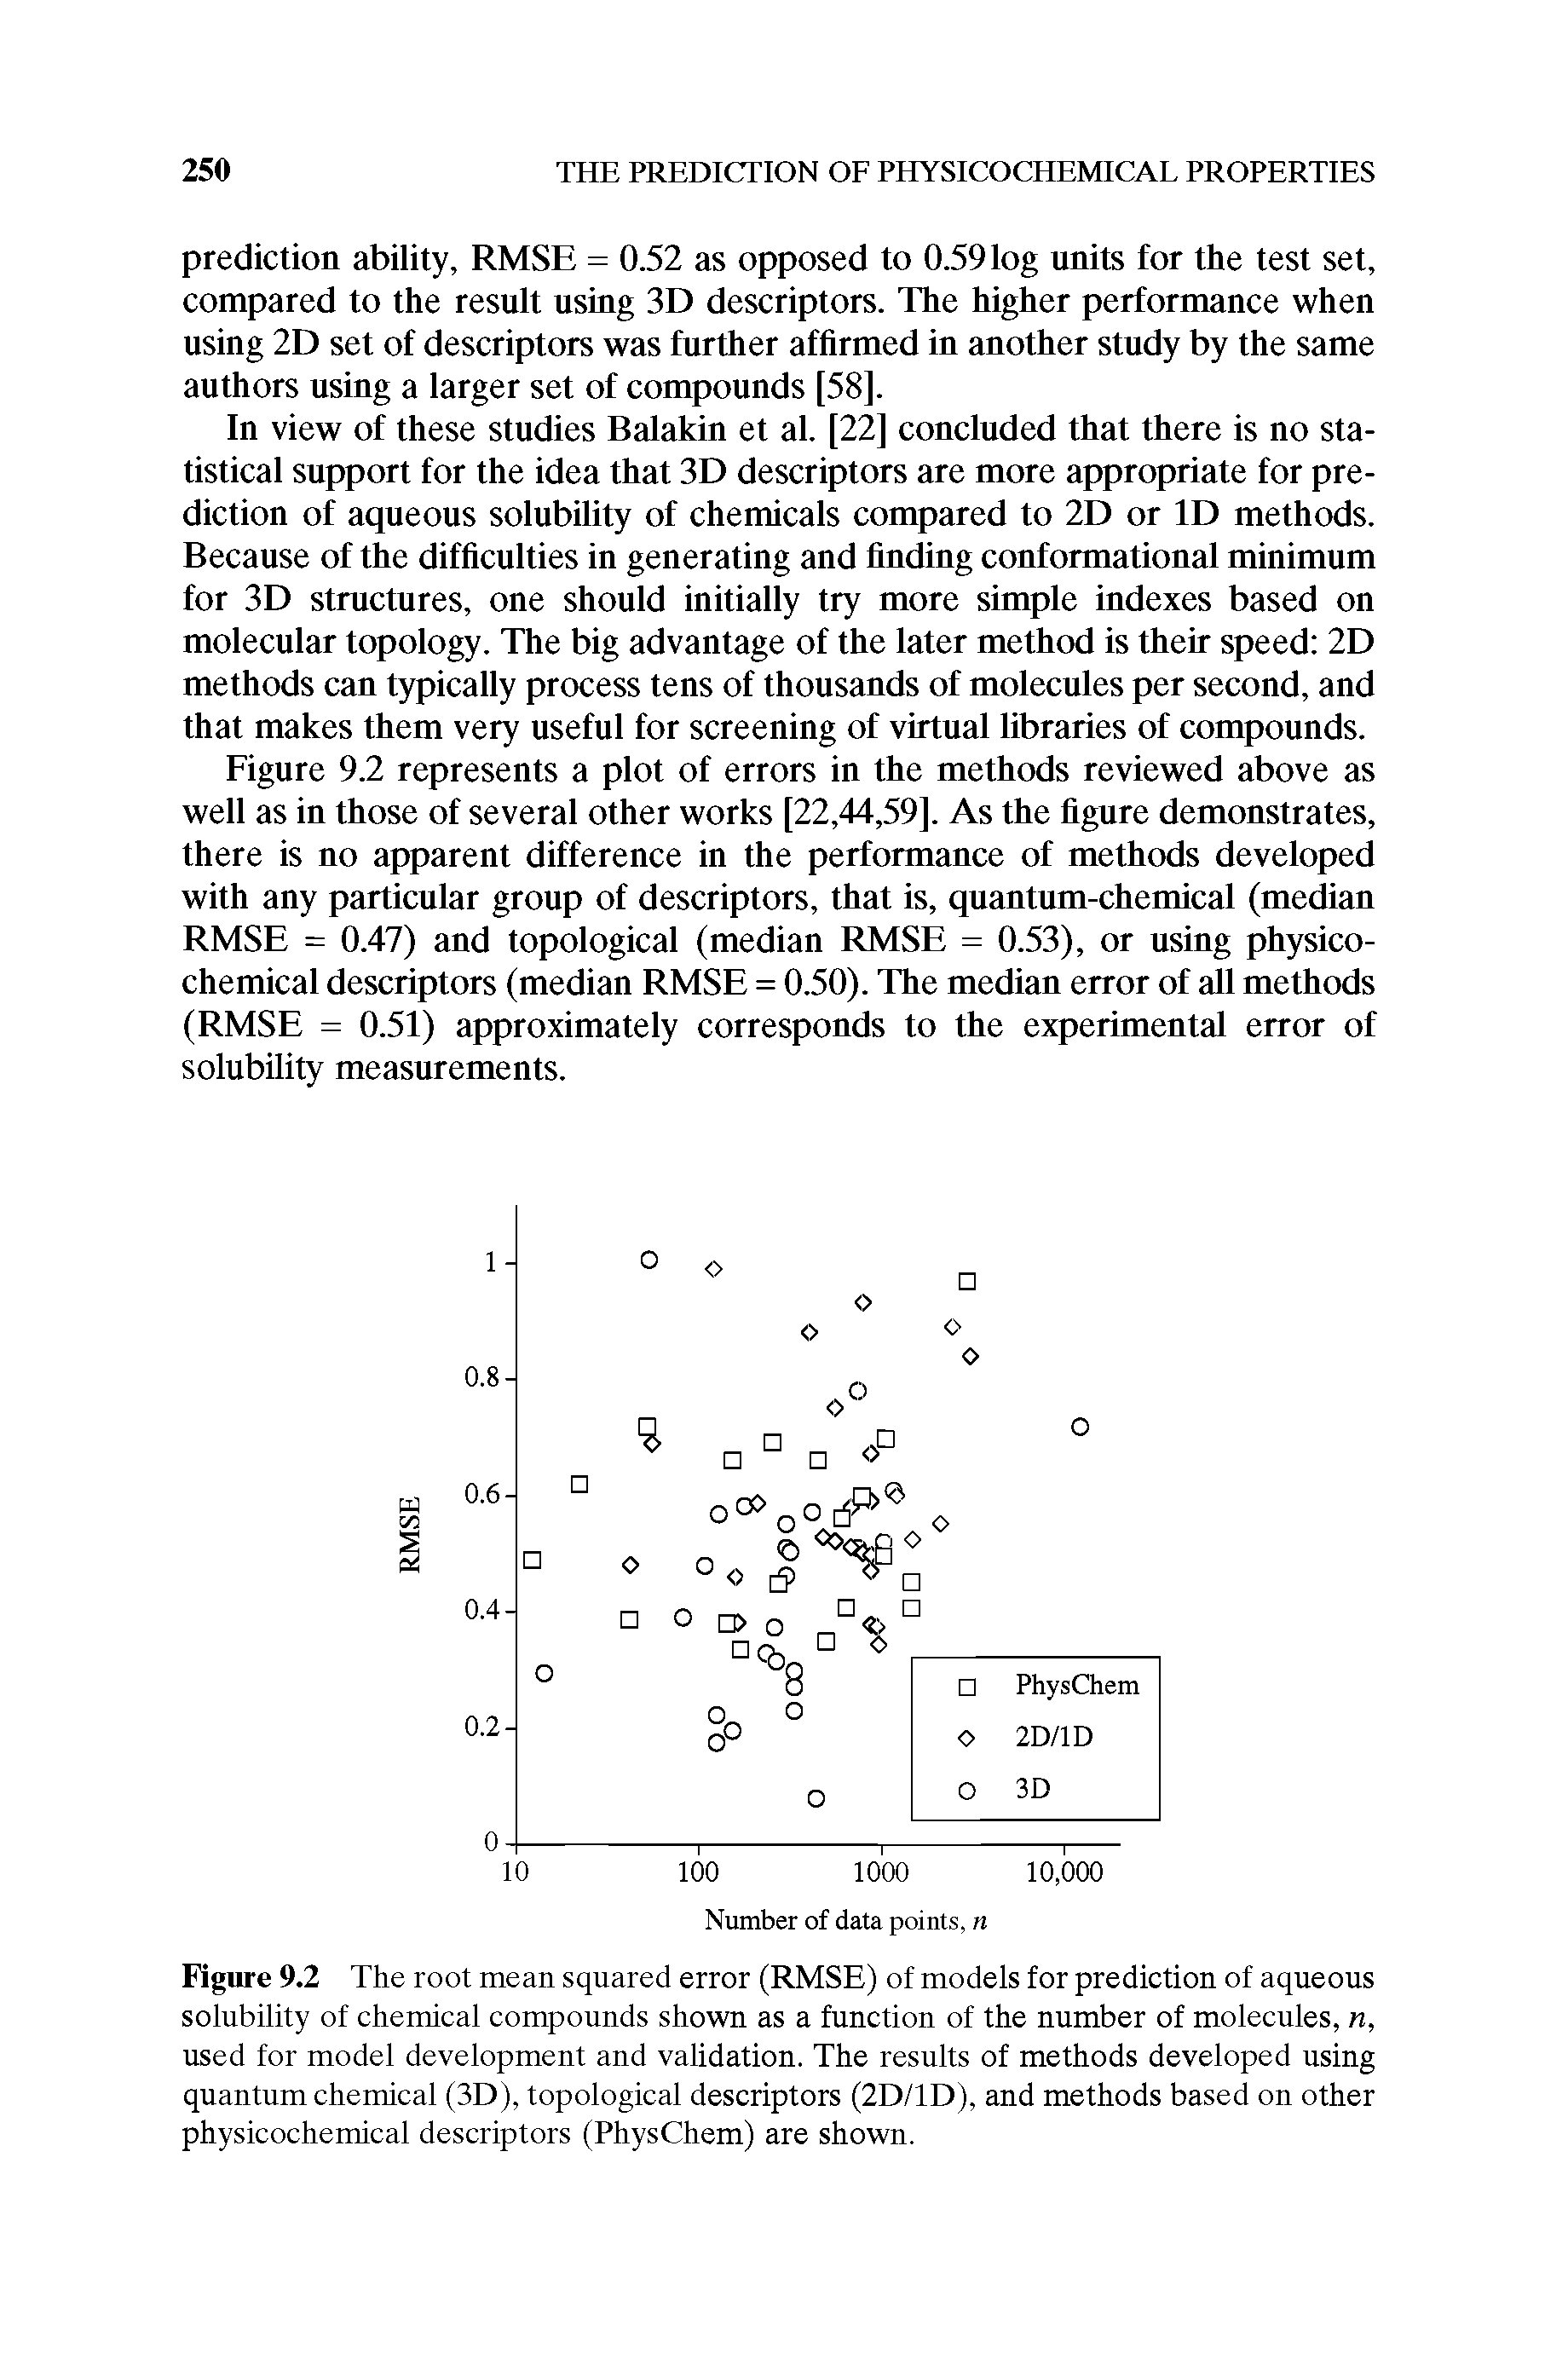 Figure 9.2 The root mean squared error (RMSE) of models for prediction of aqueous solubility of chemical compounds shown as a function of the number of molecules, n, used for model development and validation. The results of methods developed using quantum chemical (3D), topological descriptors (2D/1D), and methods based on other physicochemical descriptors (PhysChem) are shown.